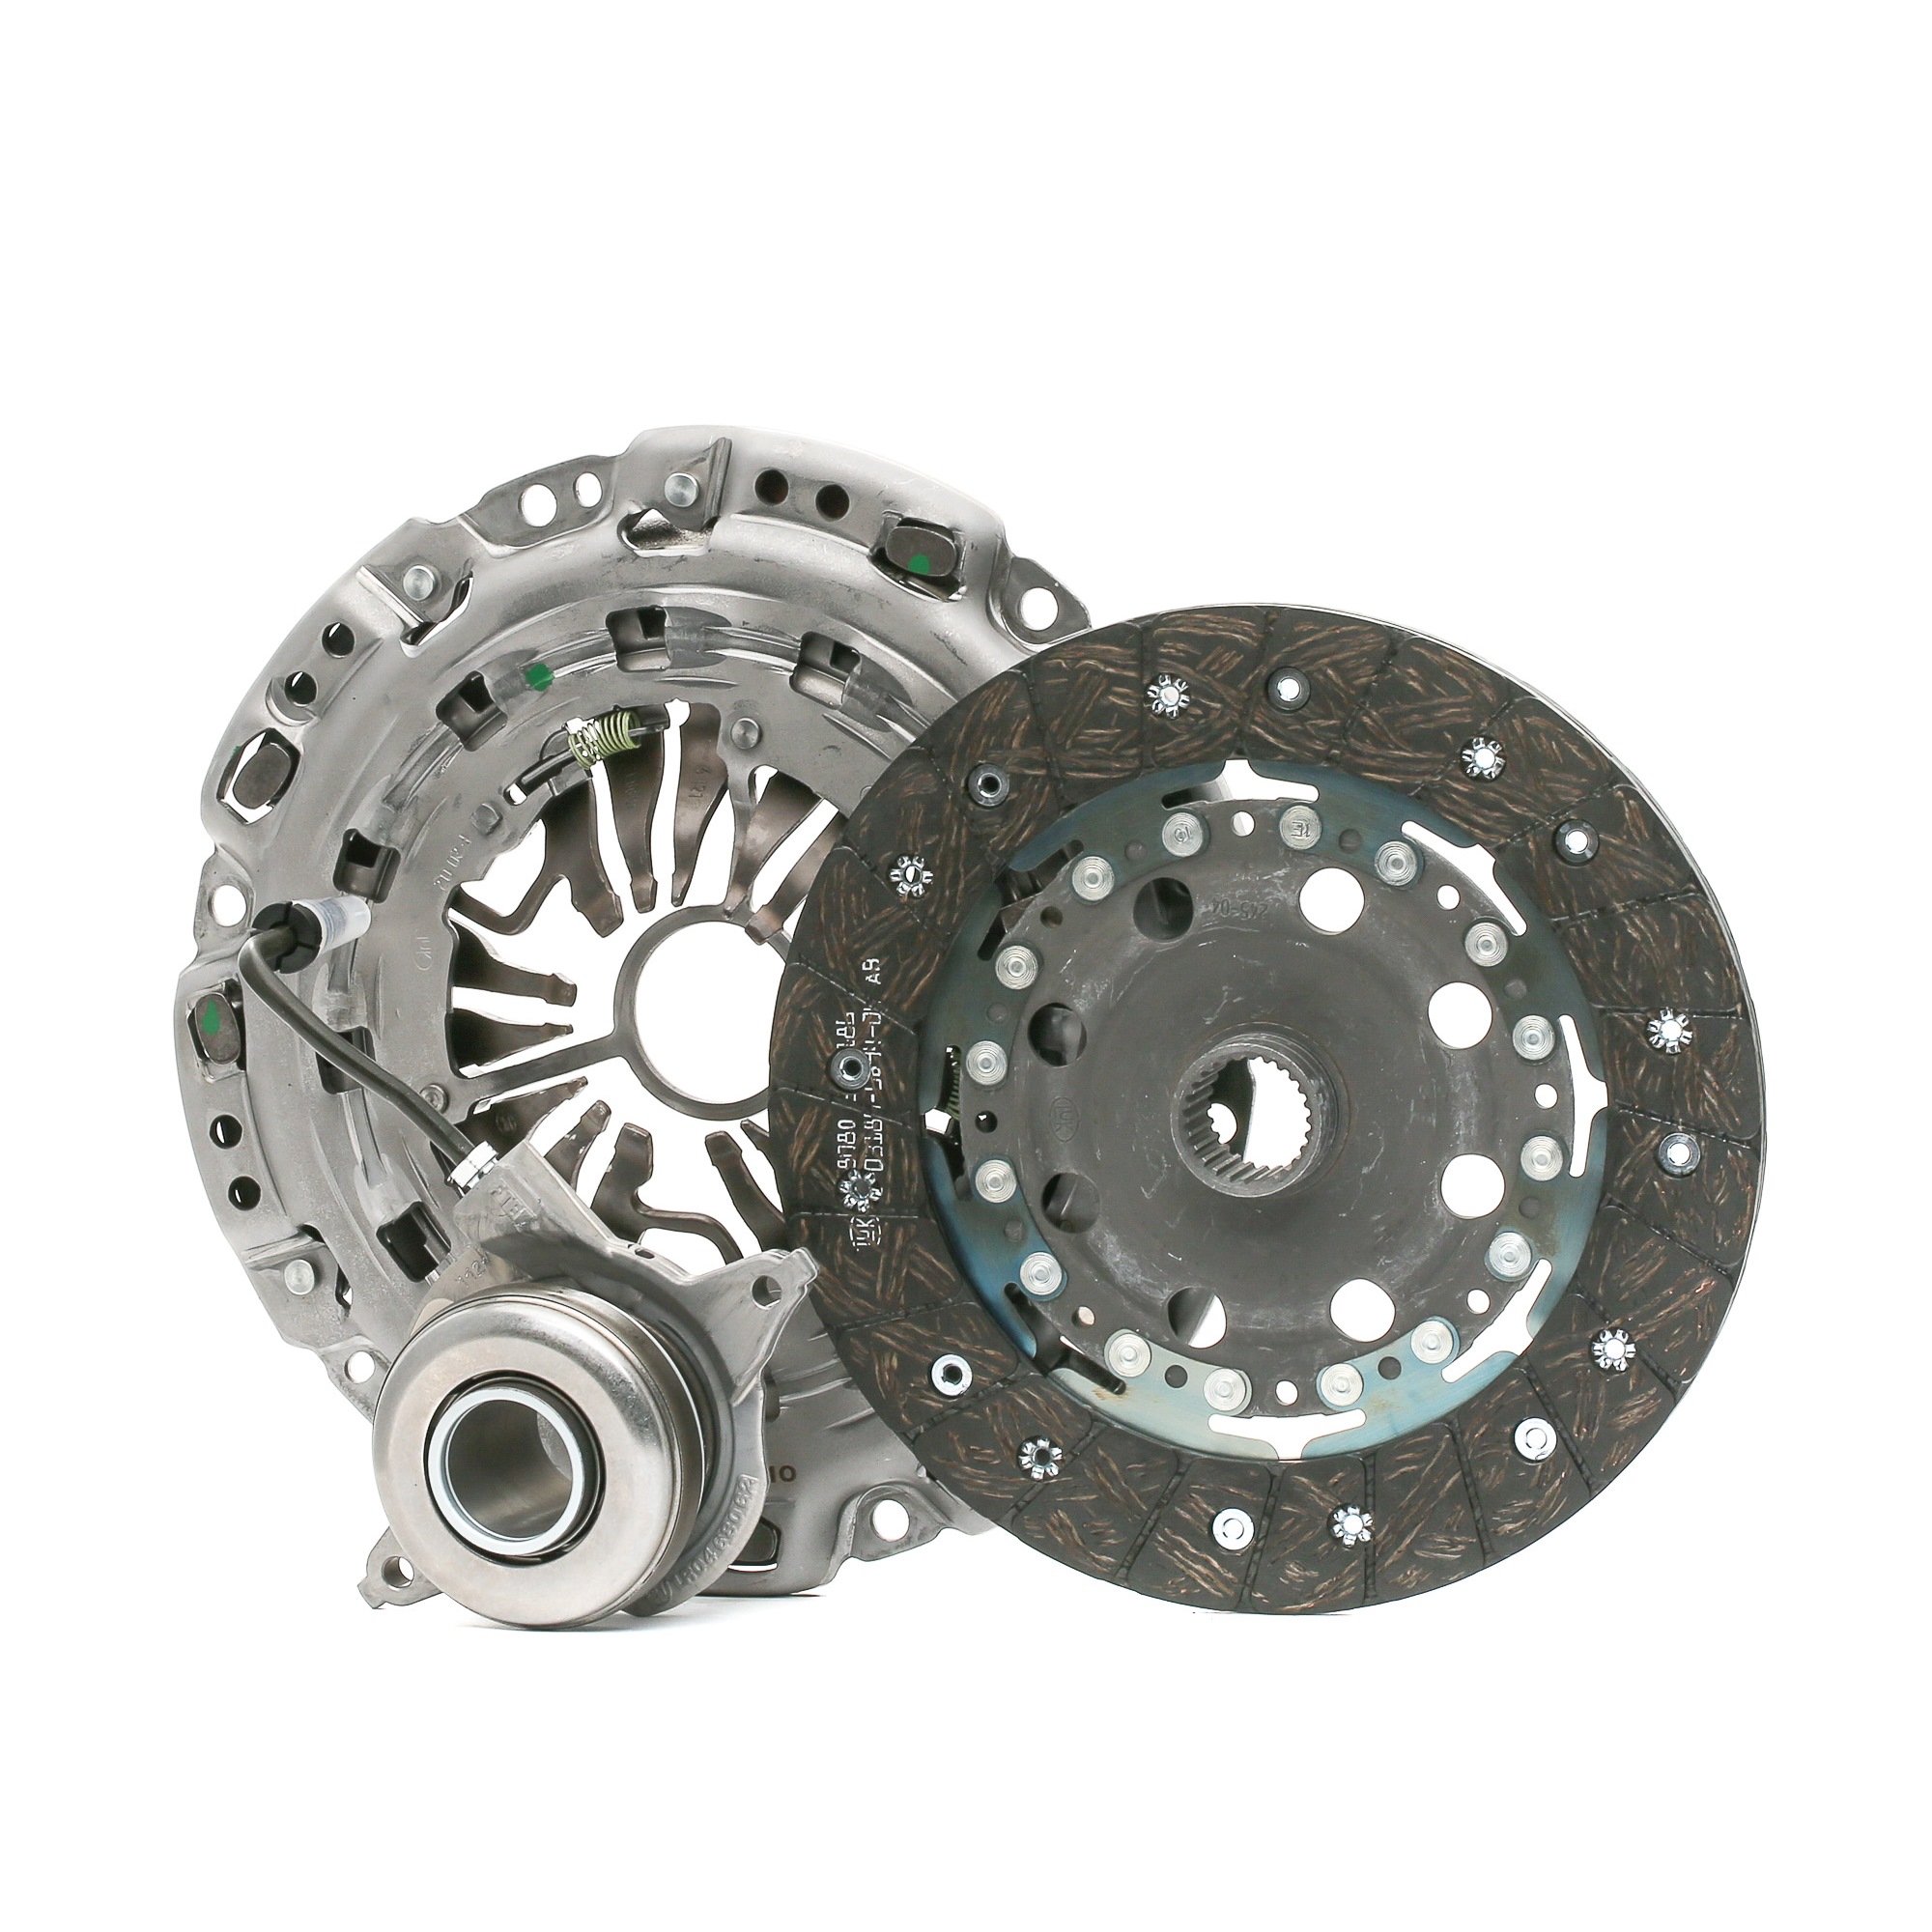 LuK 623 3215 33 Clutch kit for engines with dual-mass flywheel, with central slave cylinder, Requires special tools for mounting, Check and replace dual-mass flywheel if necessary., with automatic adjustment, 230mm